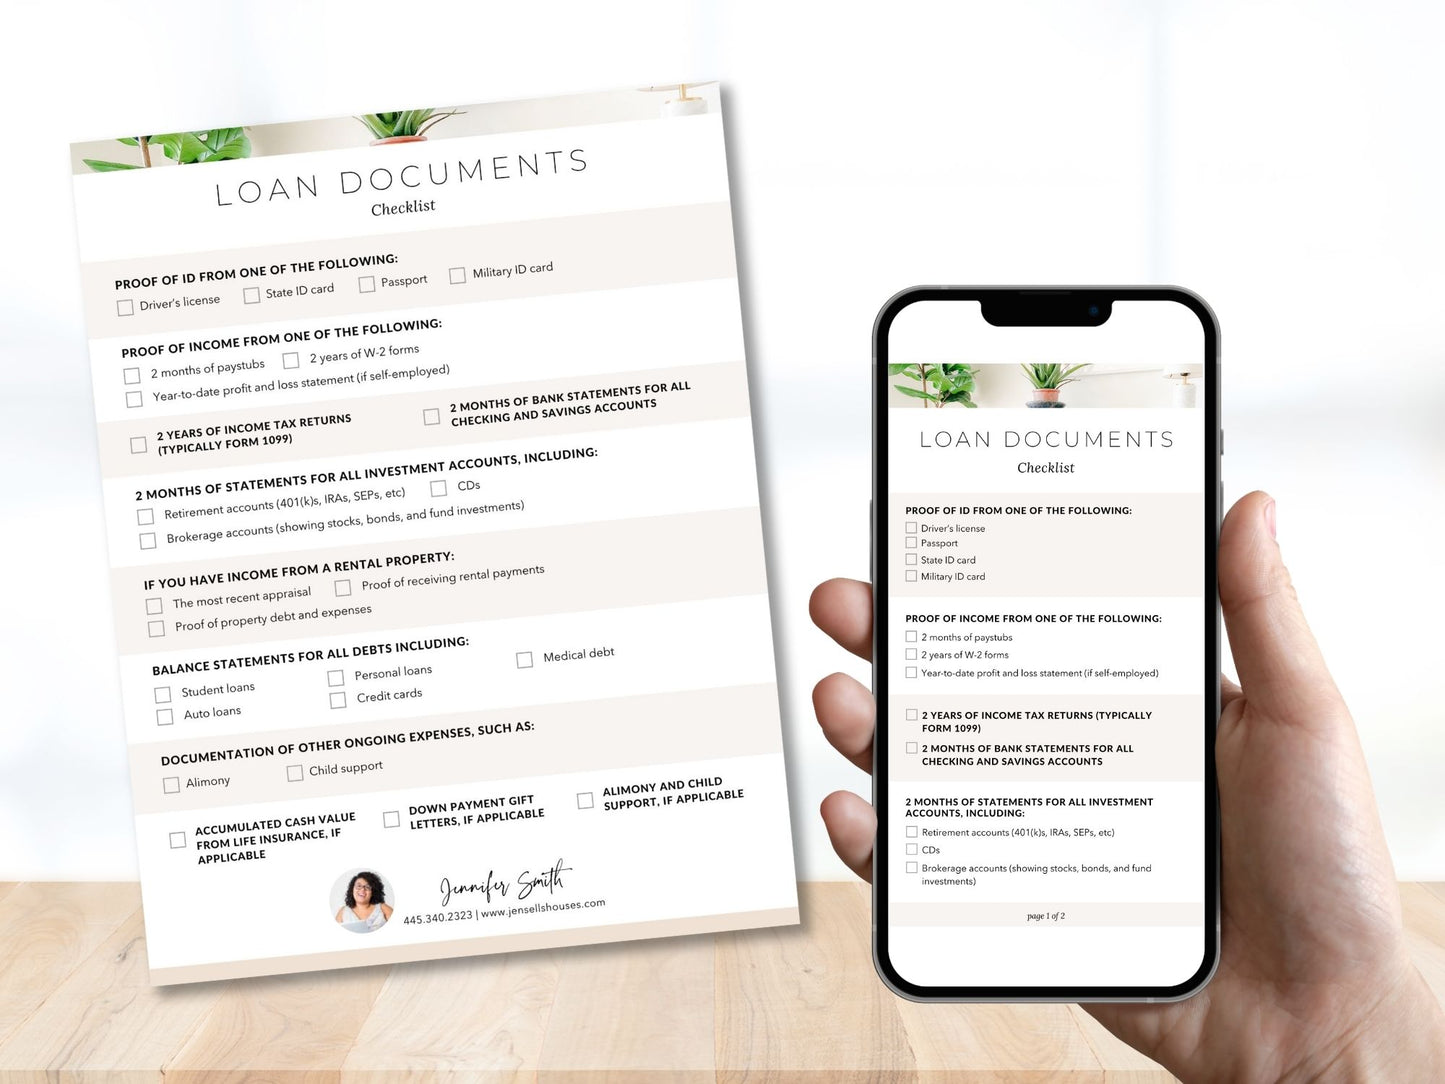 Loan Documents Checklist Textable and Flyer Bundle - Streamline the loan process with a comprehensive Loan Documents Checklist and a convenient Textable Loan Documents Checklist for a smooth loan application journey.